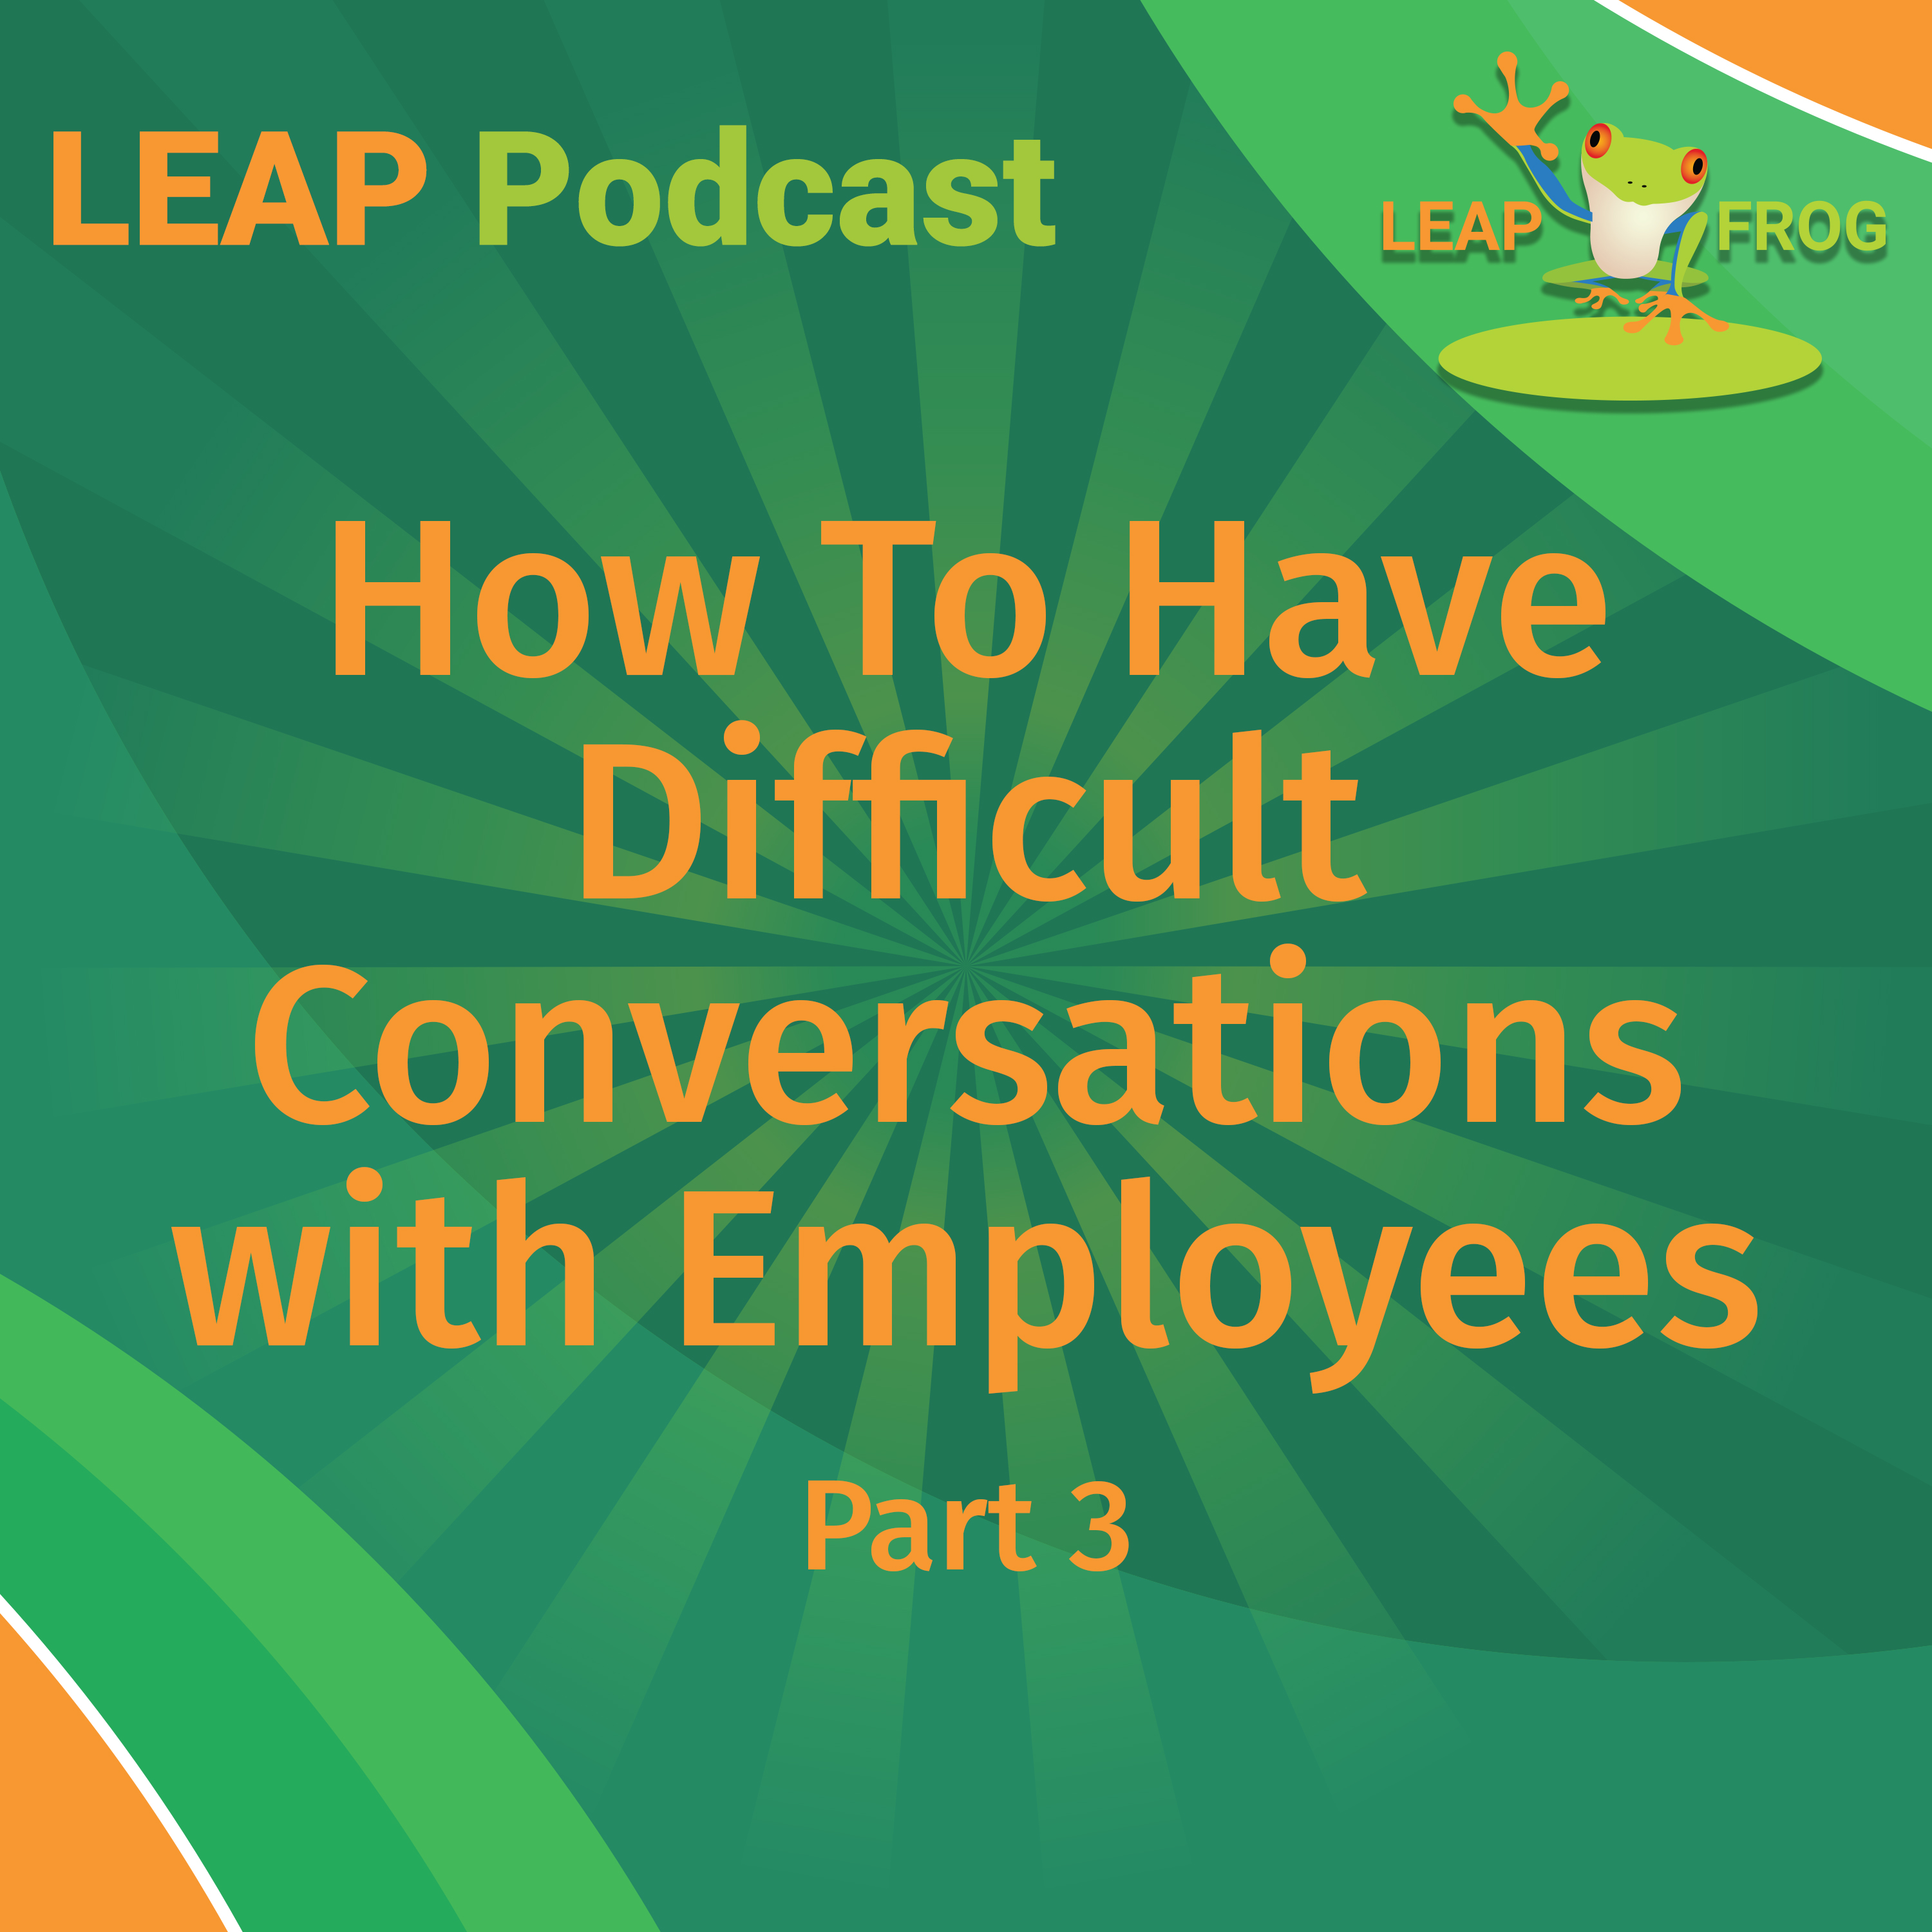 LEAP Podcast How To Have Difficult Conversations with Employees part 3 episode cover art